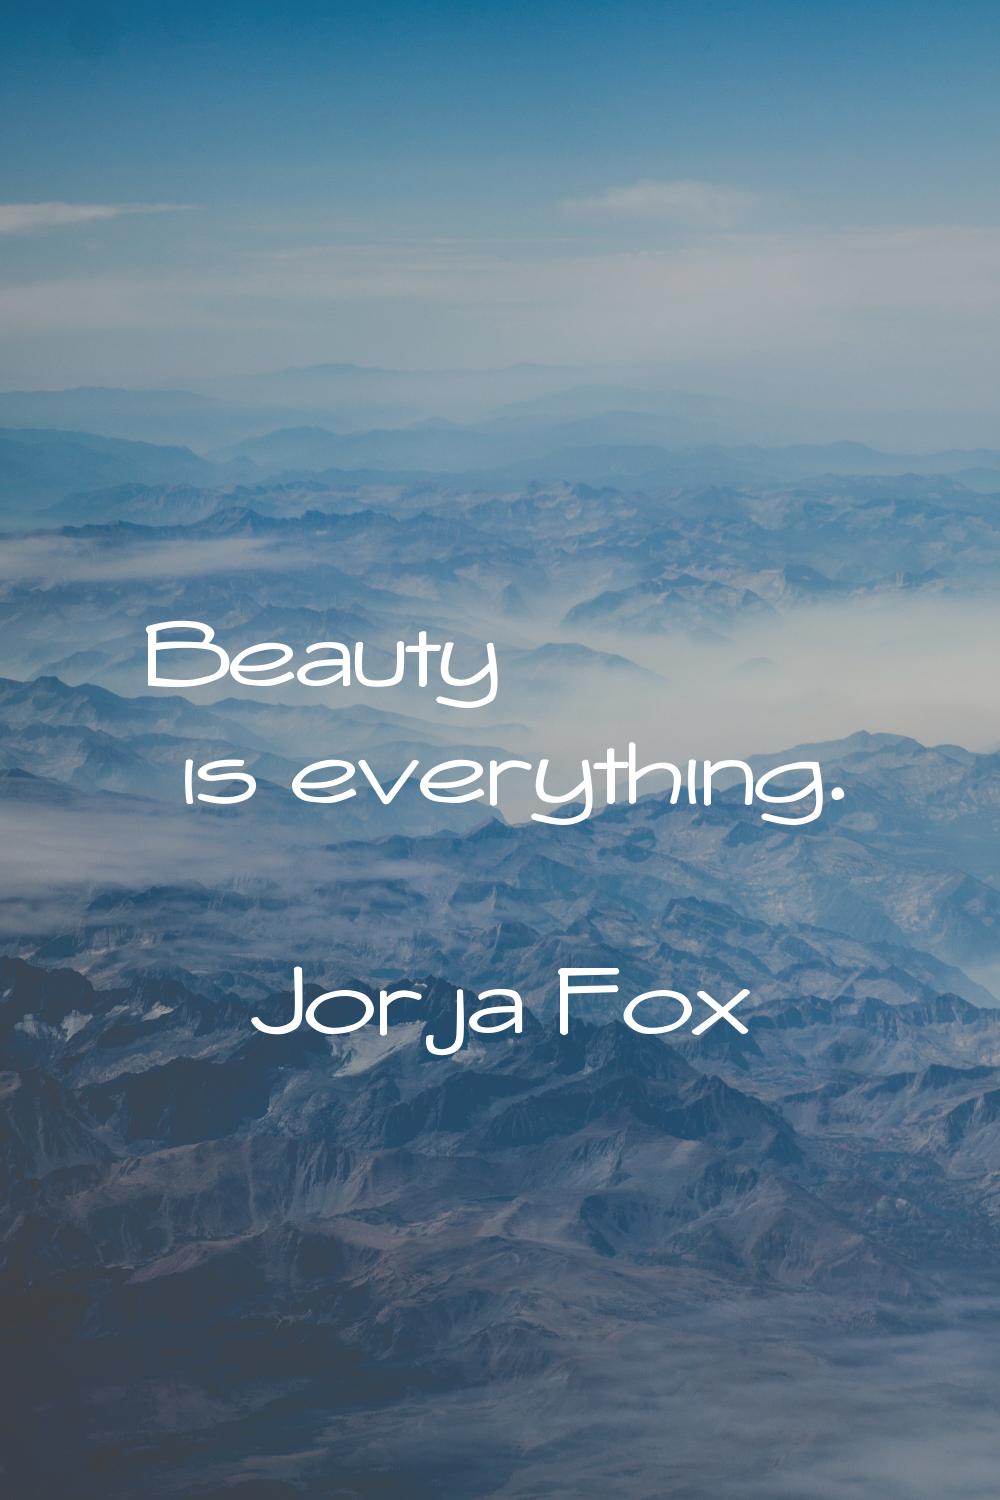 Beauty is everything.